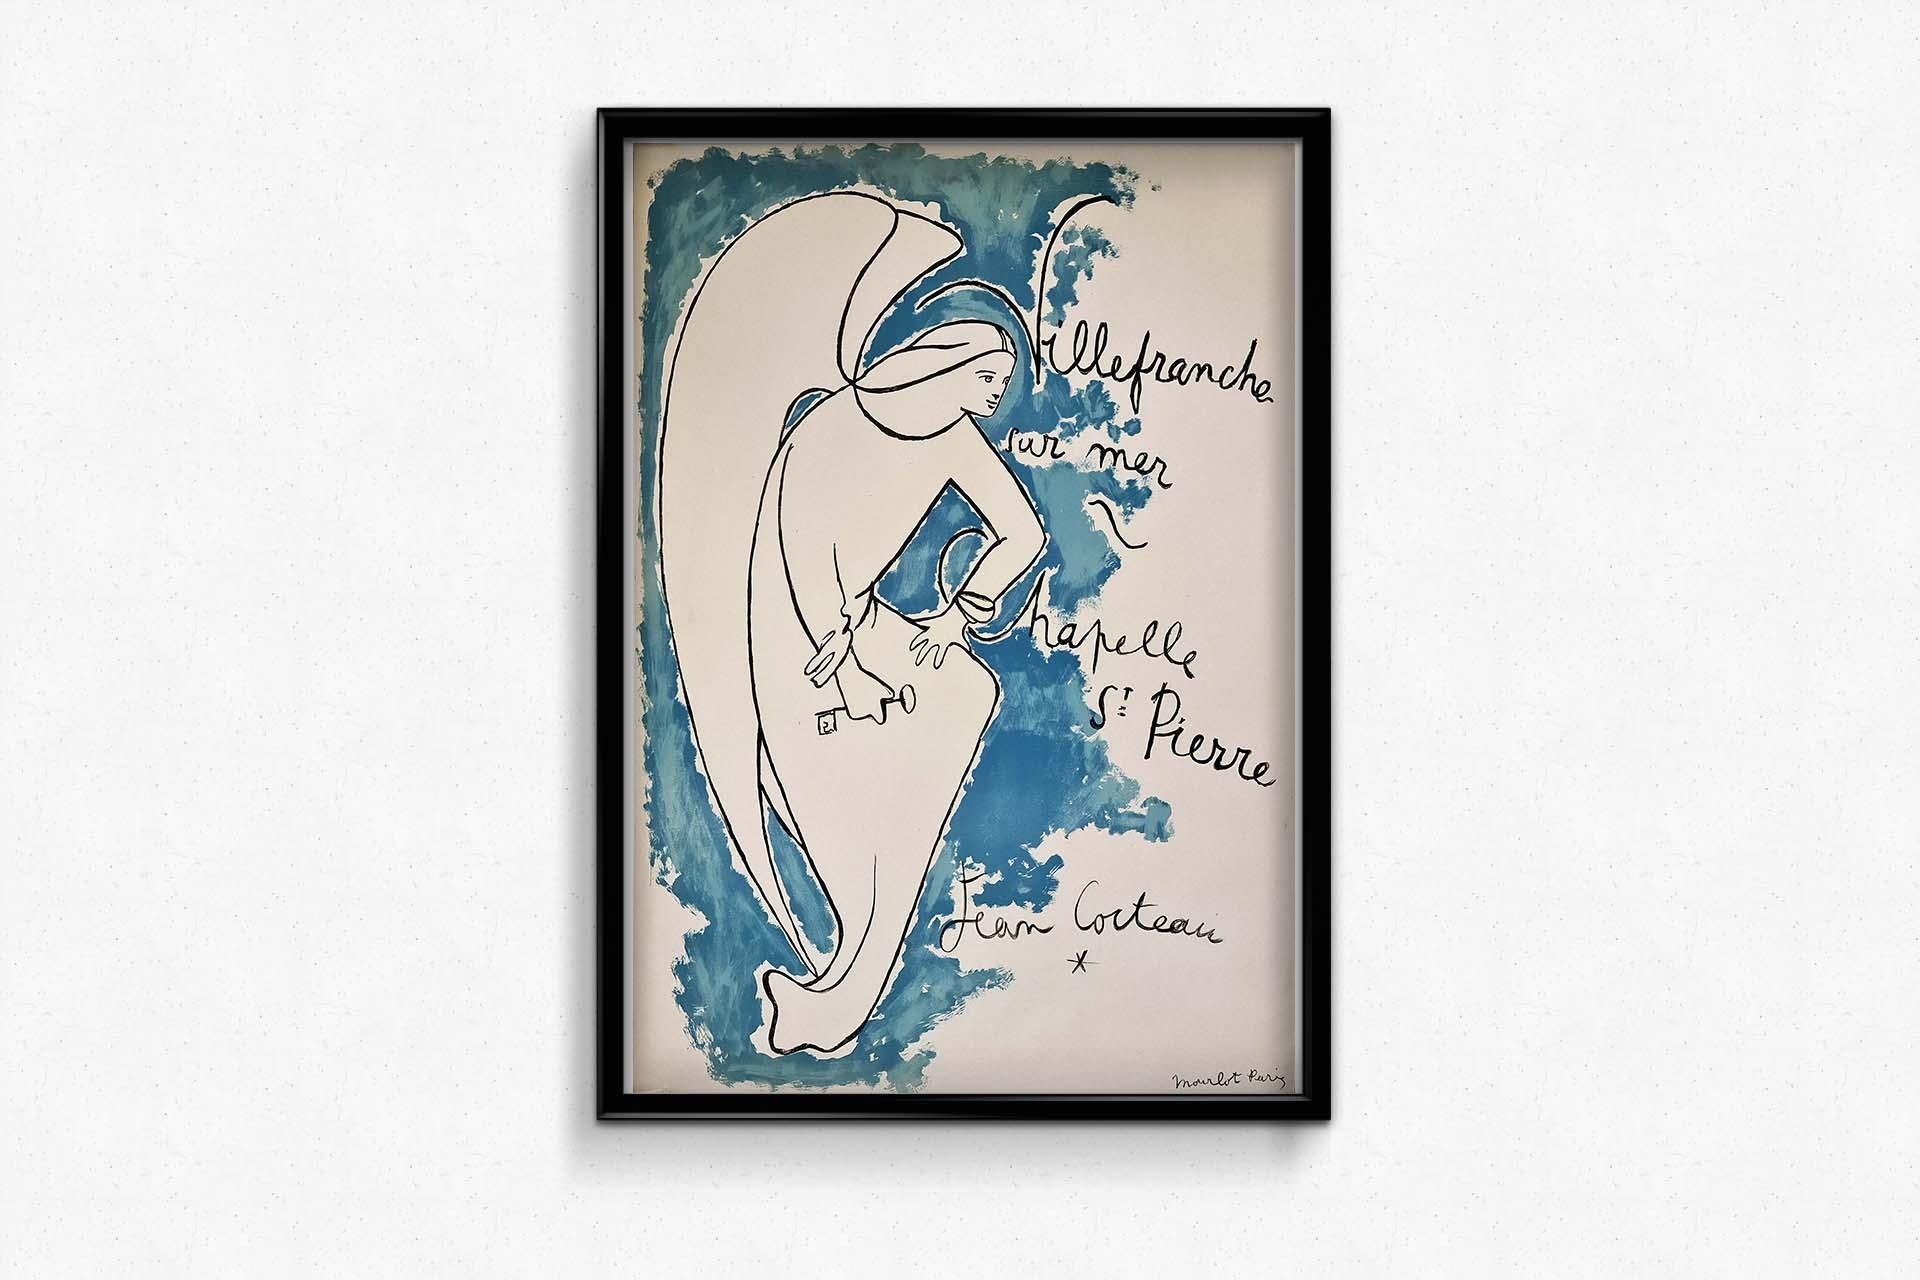 This iconic and original lithographic poster was created by Jean Cocteau to celebrate the Chapelle St. Pierre in the town of Villefranche-sur-Mer, in the south of France. Cocteau spent several months in the small Mediterranean seaside village